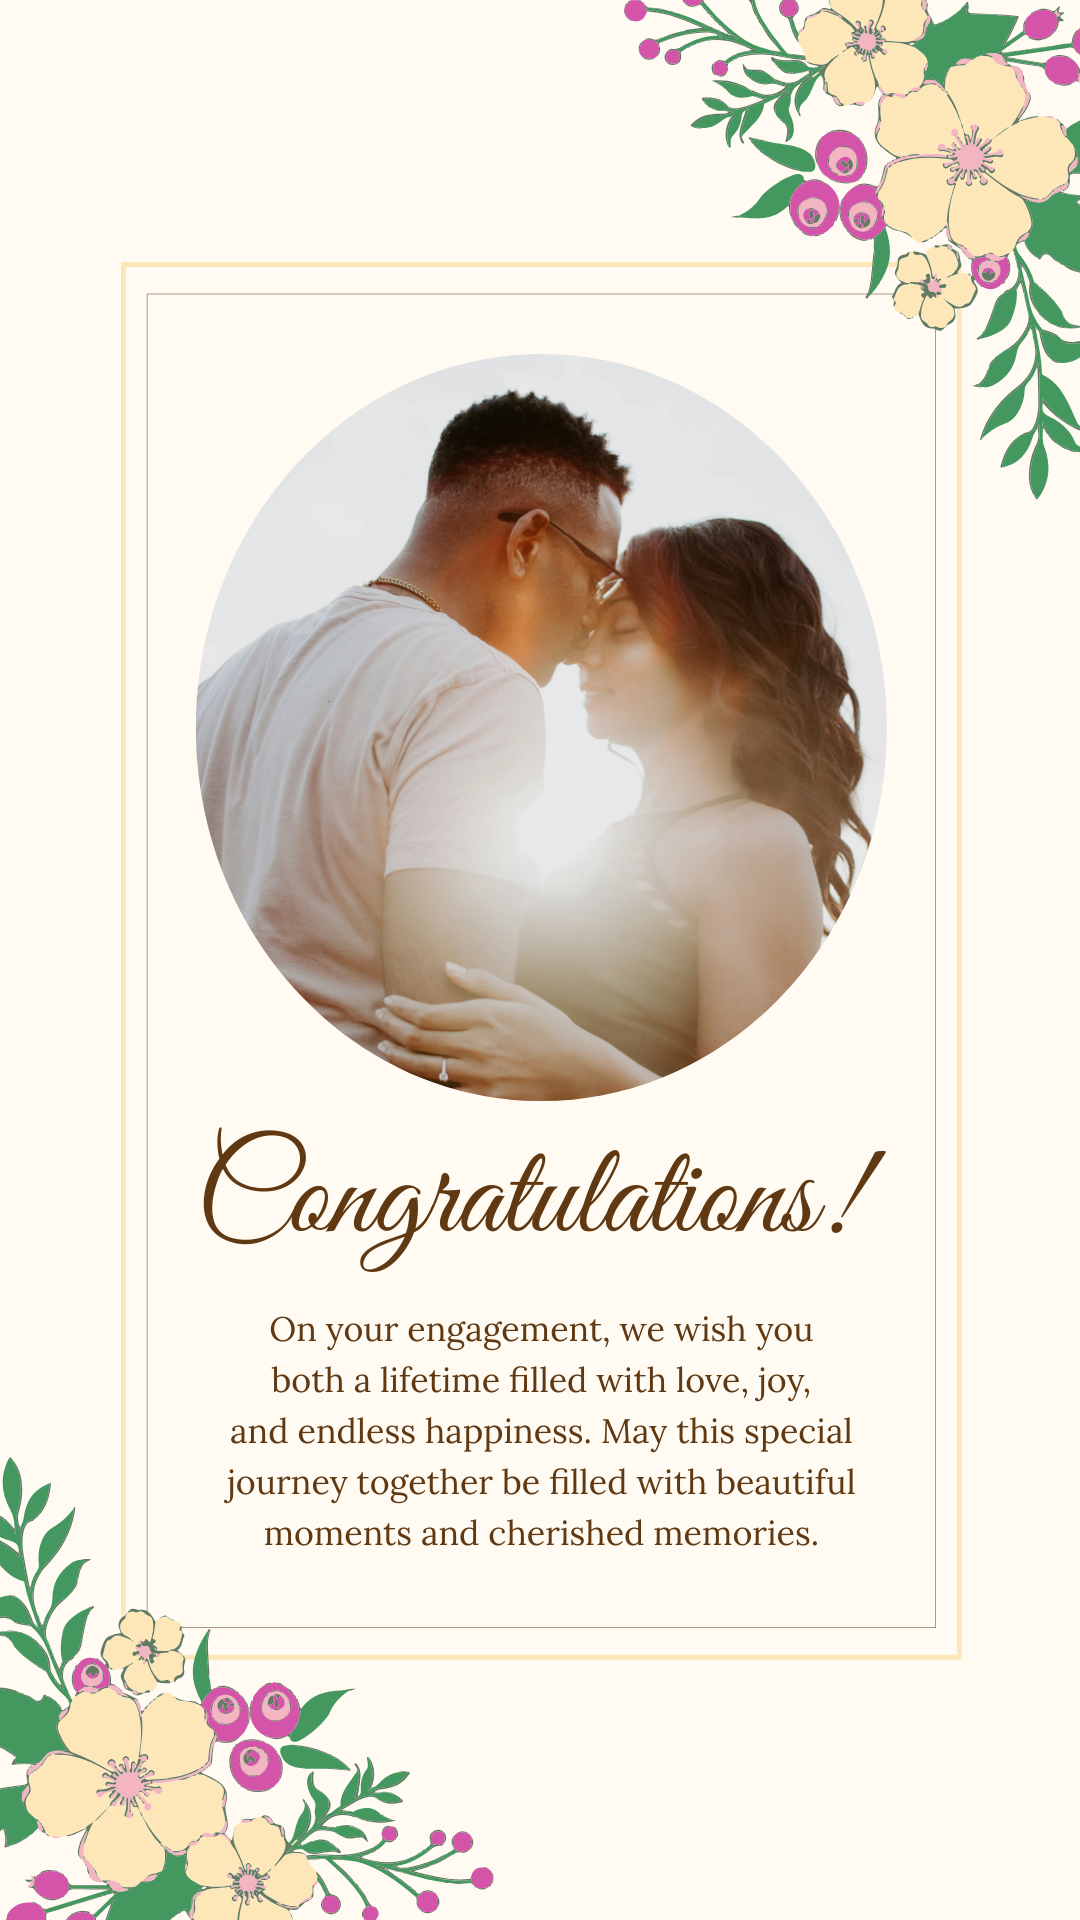 Free Congratulations Card for Engagement